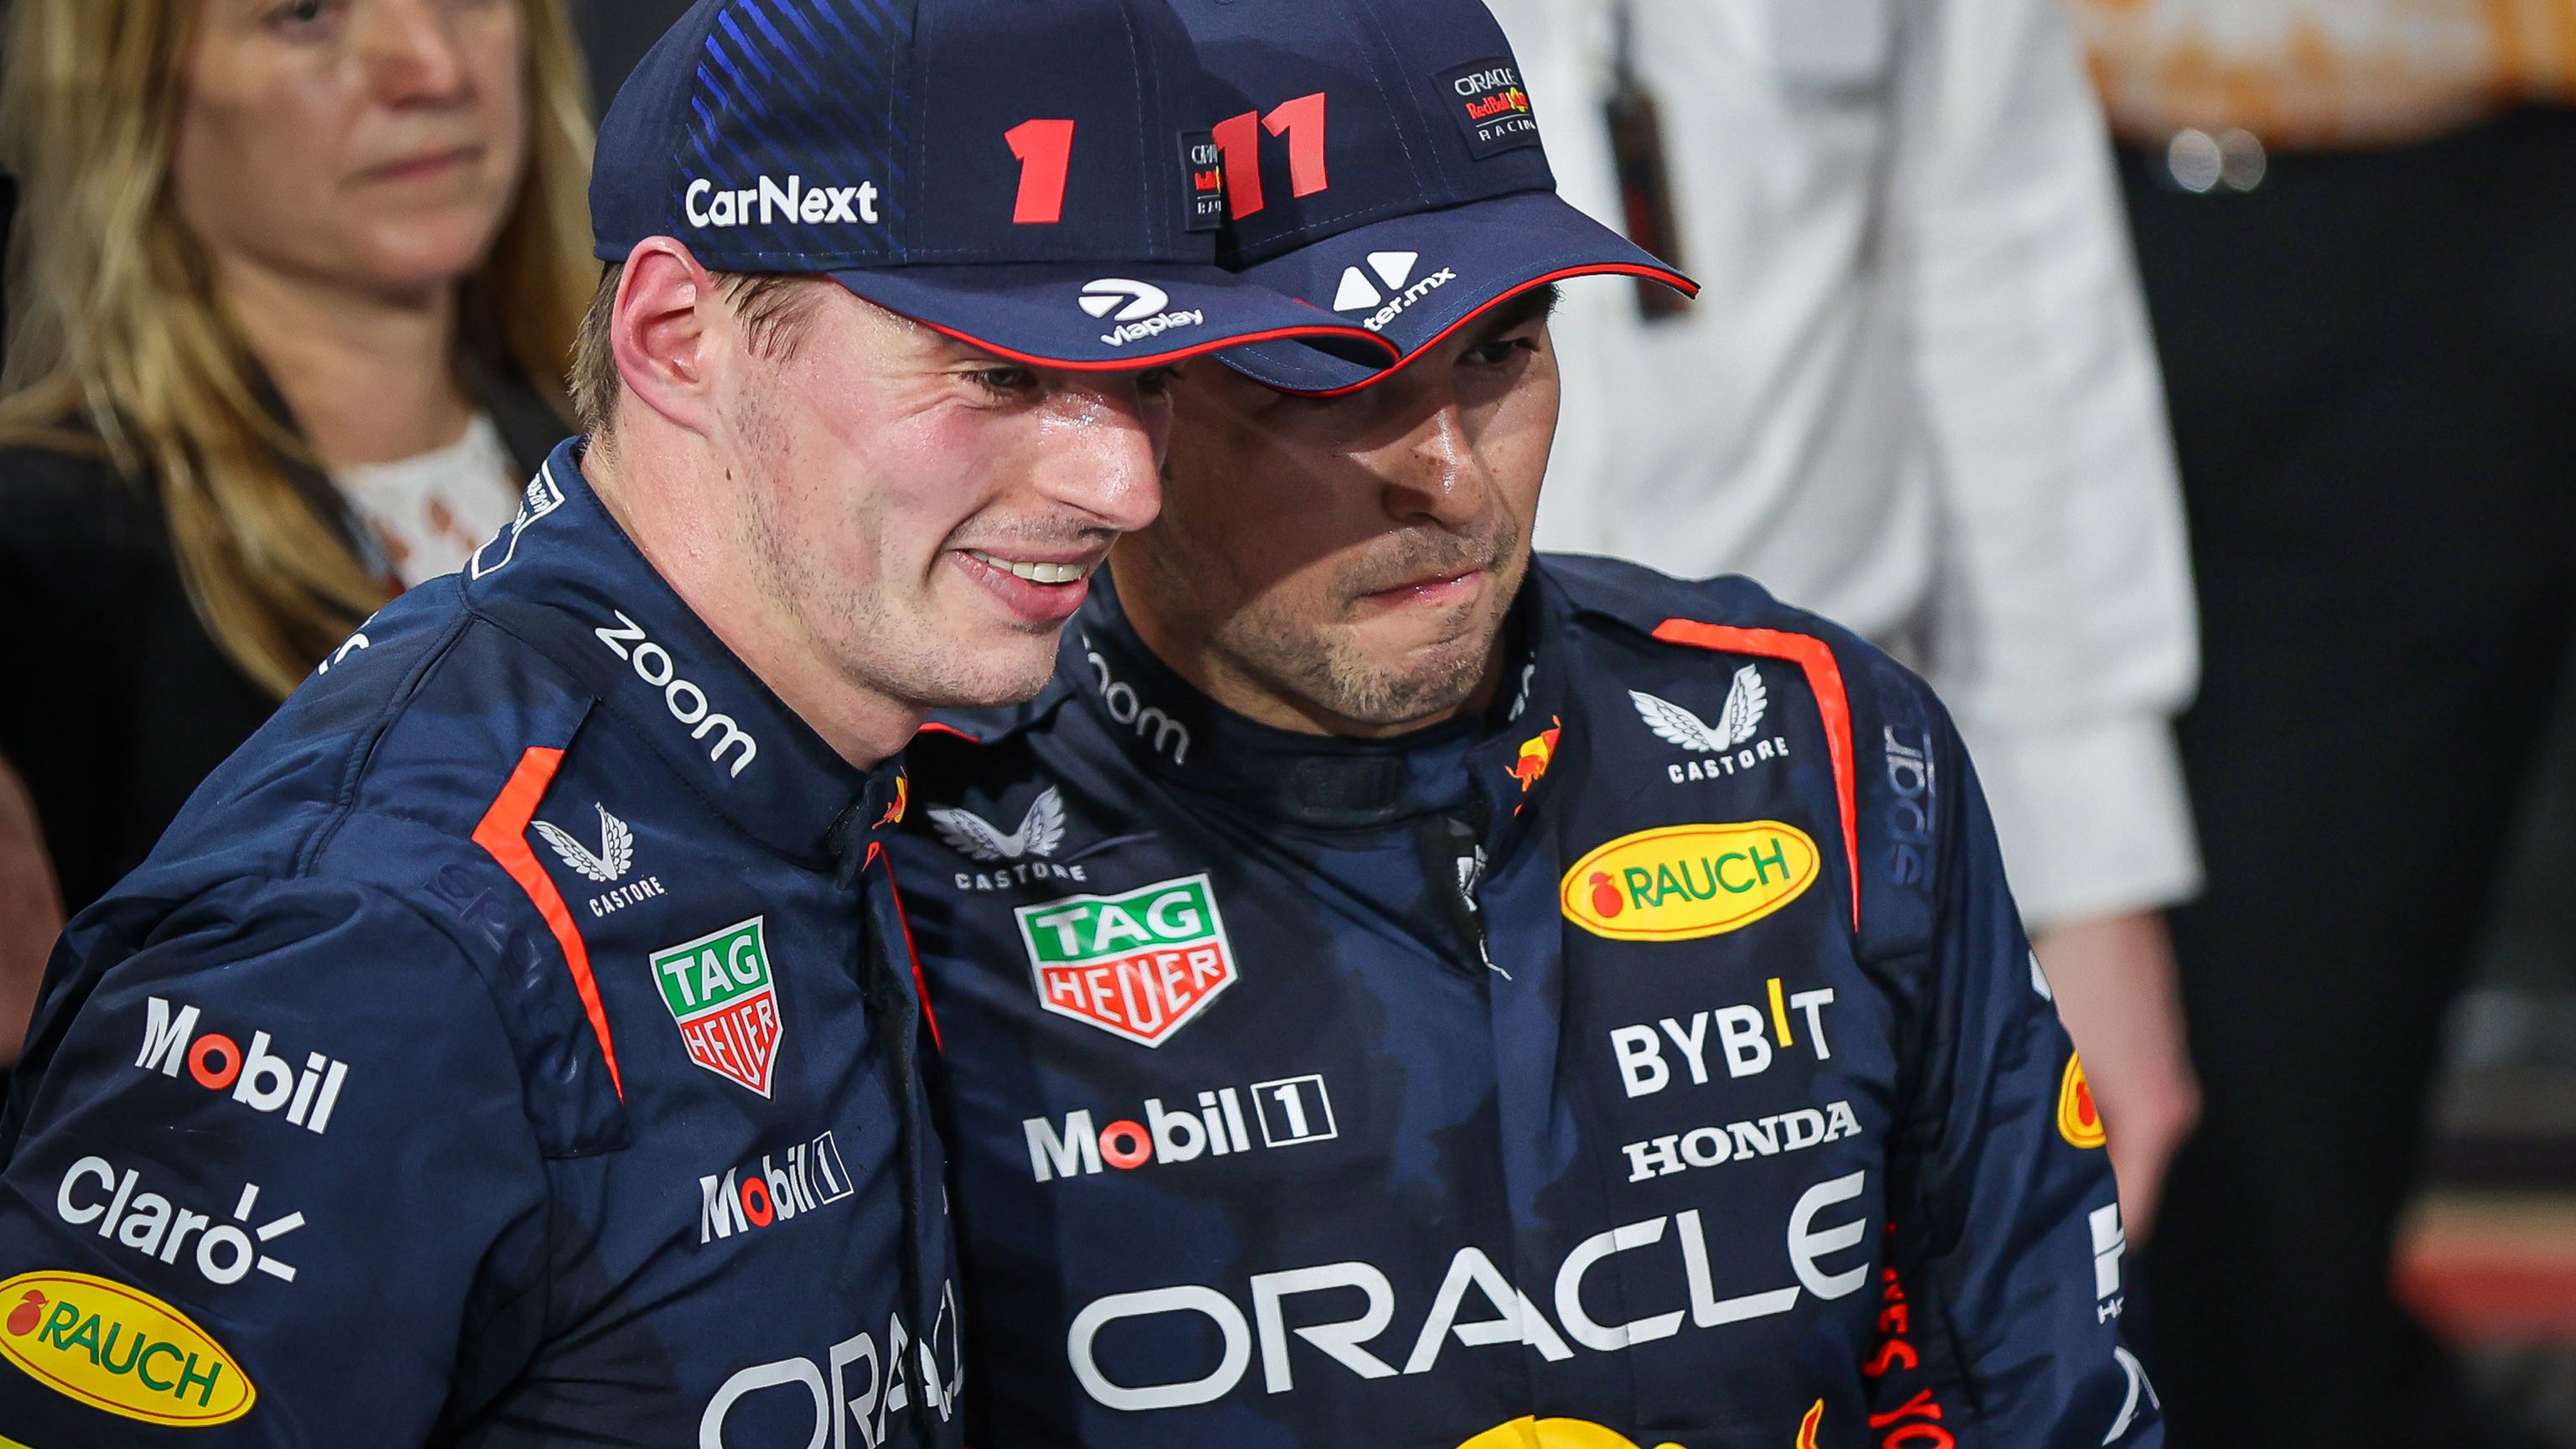 Race winner Sergio Perez (R) of Mexico and second placed Max Verstappen (L) of the Netherlands and Oracle Red Bull Racing celebrate after the F1 Grand Prix of Saudi Arabia at Jeddah Corniche Circuit on March 19, 2023 in Jeddah, Saudi Arabia. (Photo by Ayman Yaqoob/Anadolu Agency via Getty Images)